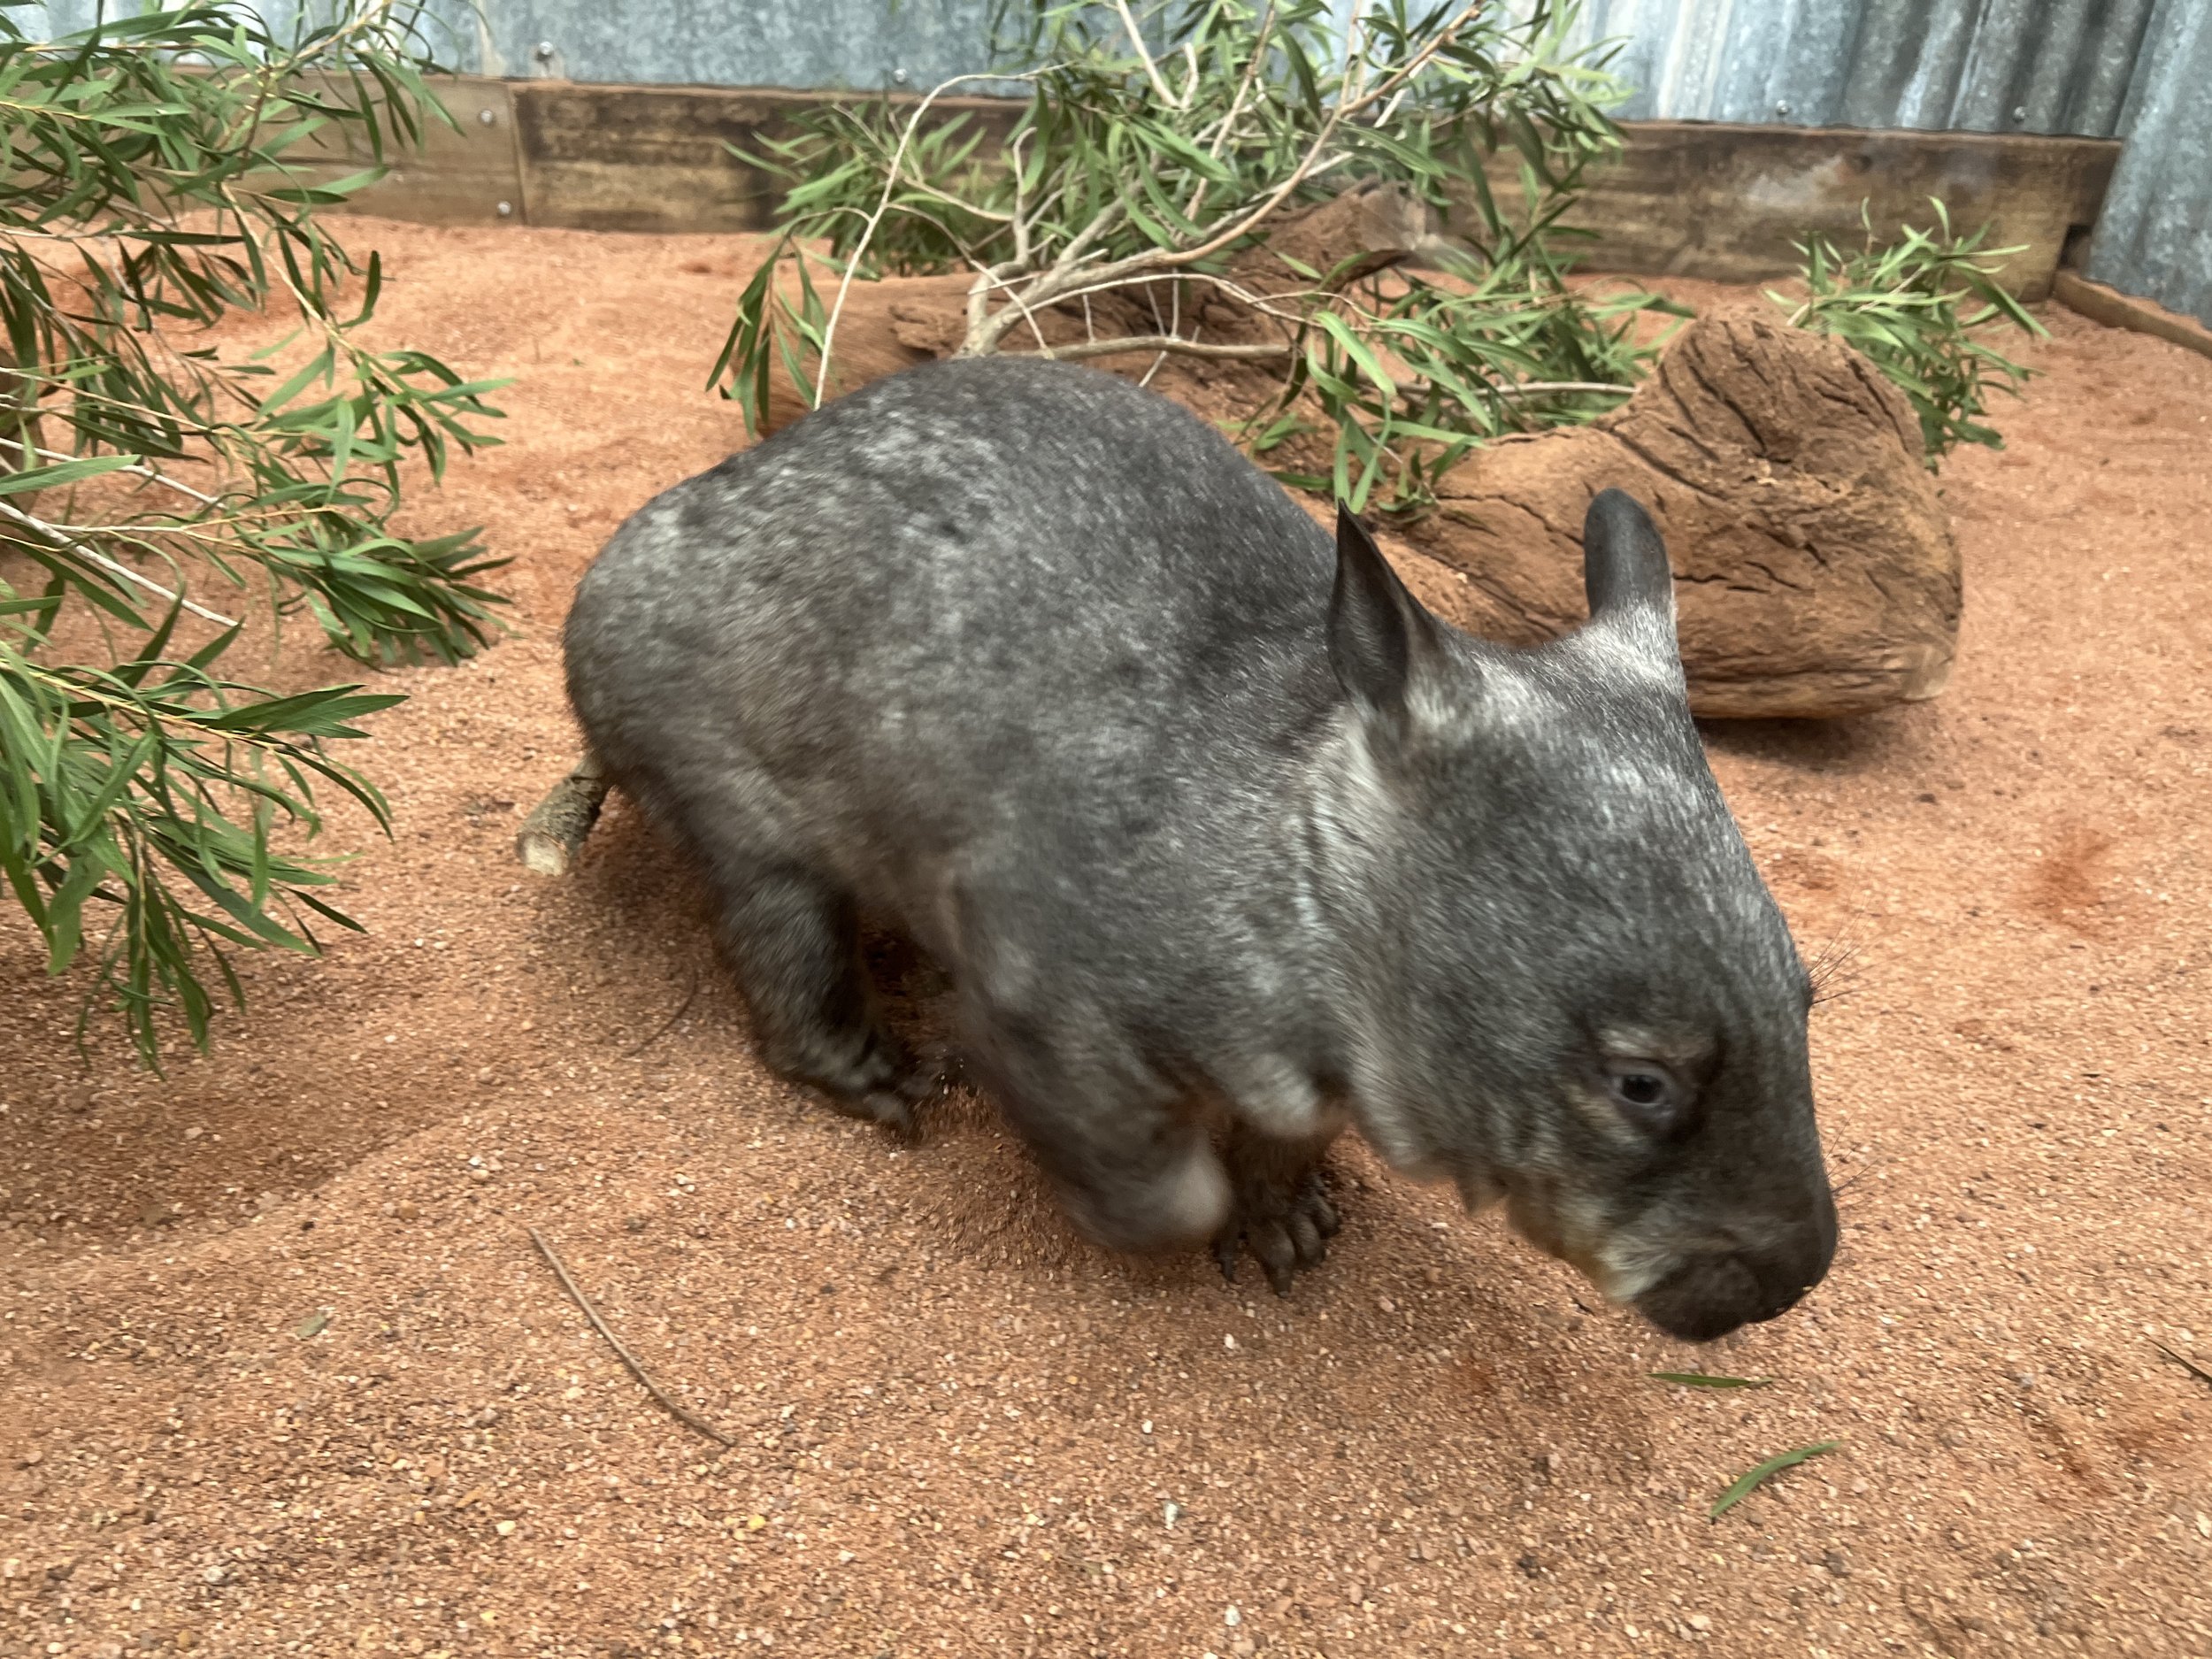 A beautiful wombat. She's about 6-months old